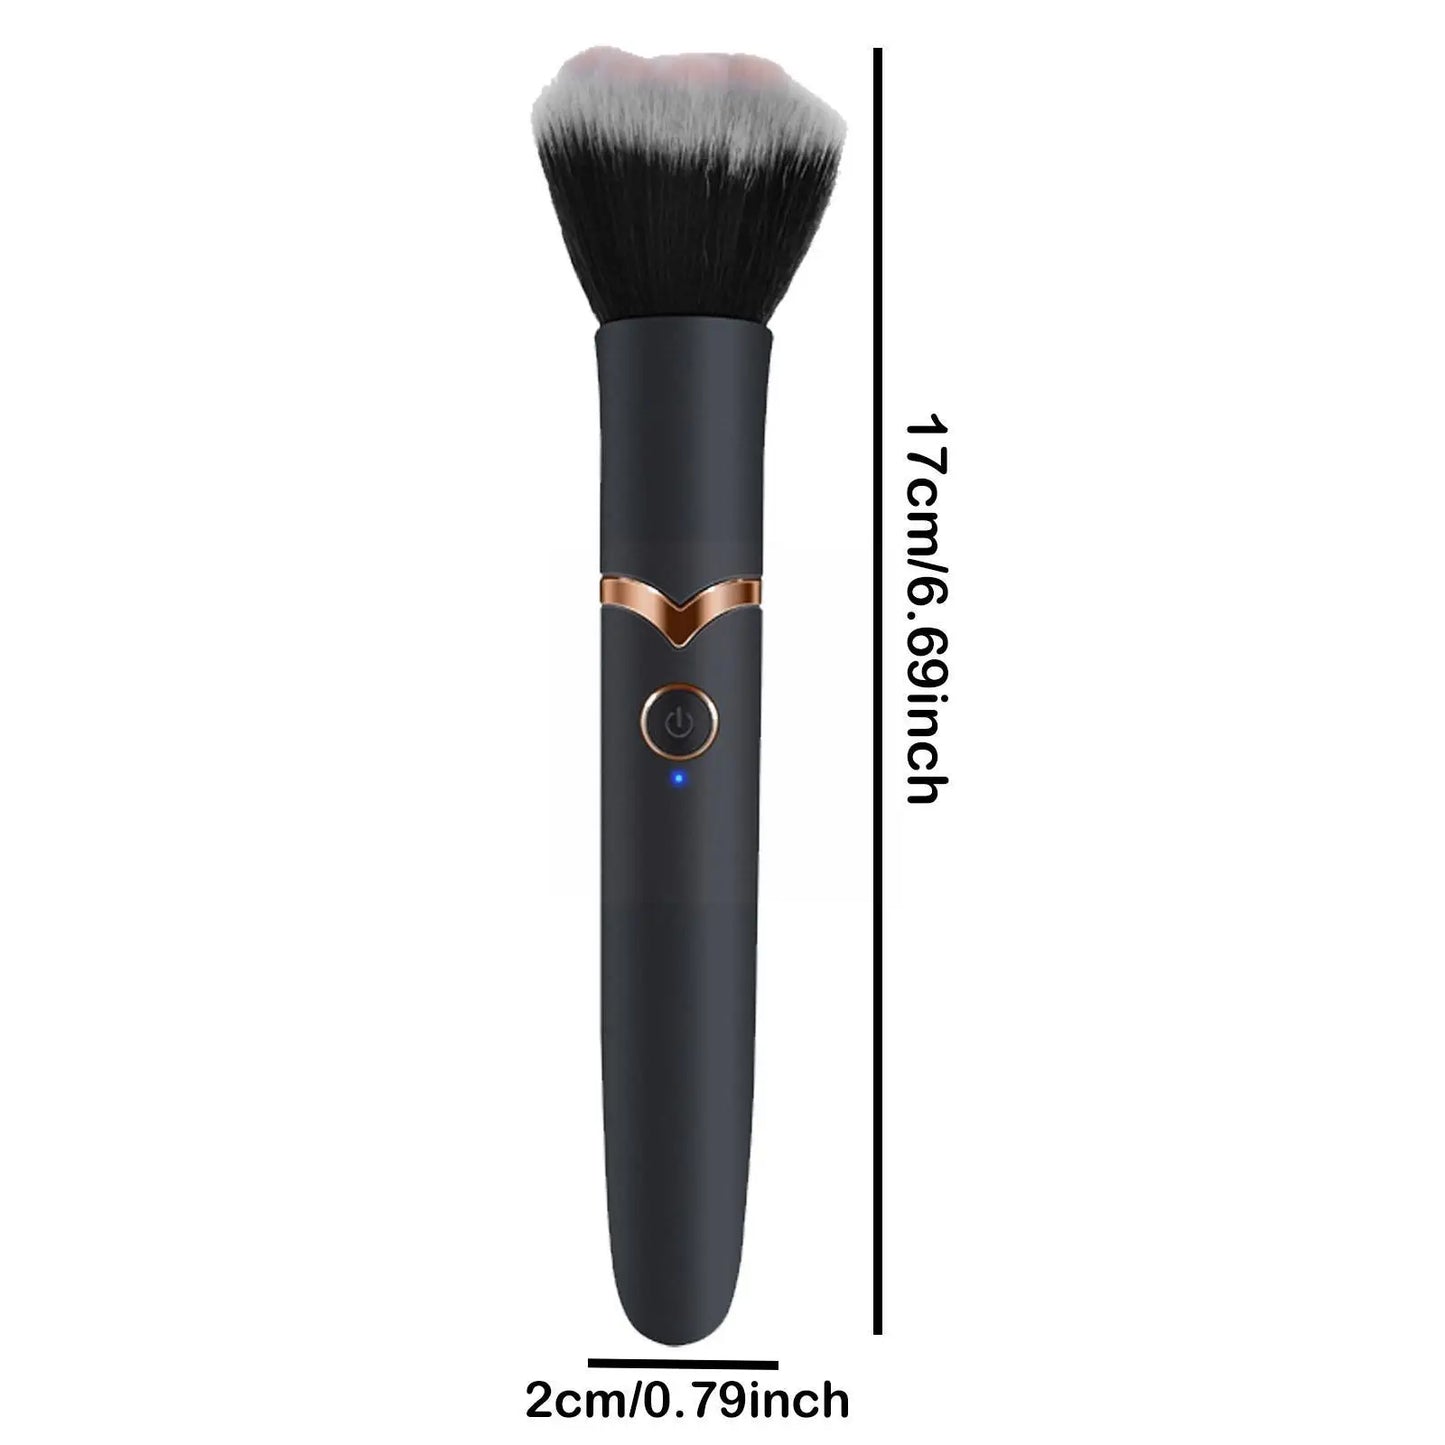 Electric Makeup Brush Foundation Mixing Brush Massage Beauty Makeup Tool Blush Loose Vibrating Face Powder Brushes Conceale E4T9